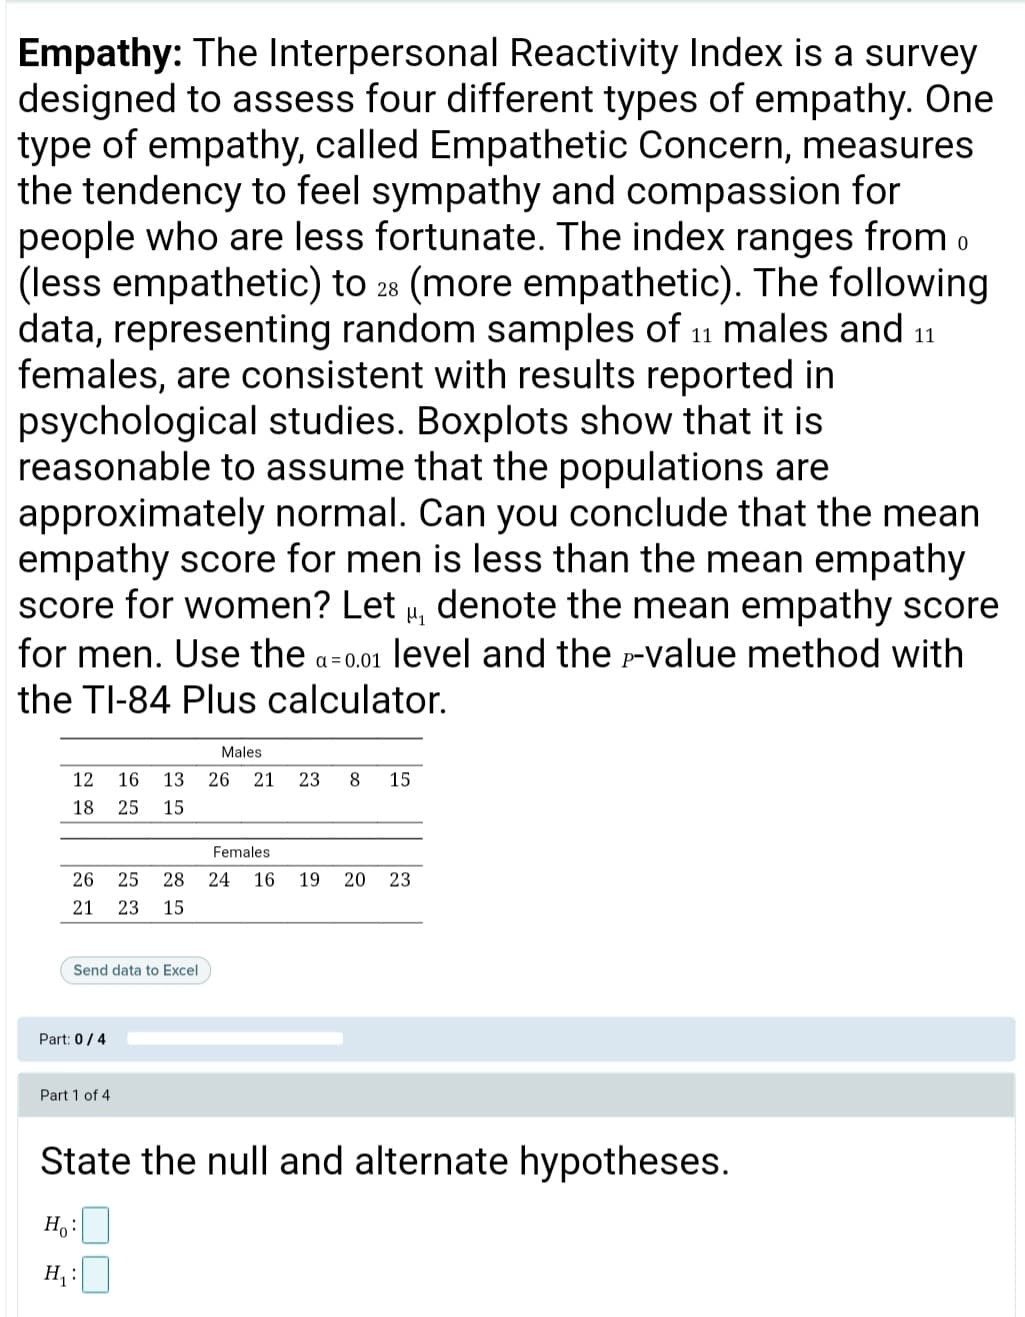 Empathy: The Interpersonal Reactivity Index is a survey
designed to assess four different types of empathy. One
type of empathy, called Empathetic Concern, measures
the tendency to feel sympathy and compassion for
people who are less fortunate. The index ranges from o
(less empathetic) to 28 (more empathetic). The following
data, representing random samples of 11 males and 11
females, are consistent with results reported in
psychological studies. Boxplots show that it is
reasonable to assume that the populations are
approximately normal. Can you conclude that the mean
empathy score for men is less than the mean empathy
score for women? Let , denote the mean empathy score
for men. Use the a-0.01 level and the -value method with
the TI-84 Plus calculator.
Males
12
16
13
26
21
23
8
15
18
25
15
Females
26
25
28 24 16
19 20
23
21
23
15
Send data to Excel
Part: 0/4
Part 1 of 4
State the null and alternate hypotheses.
H,:
H :
